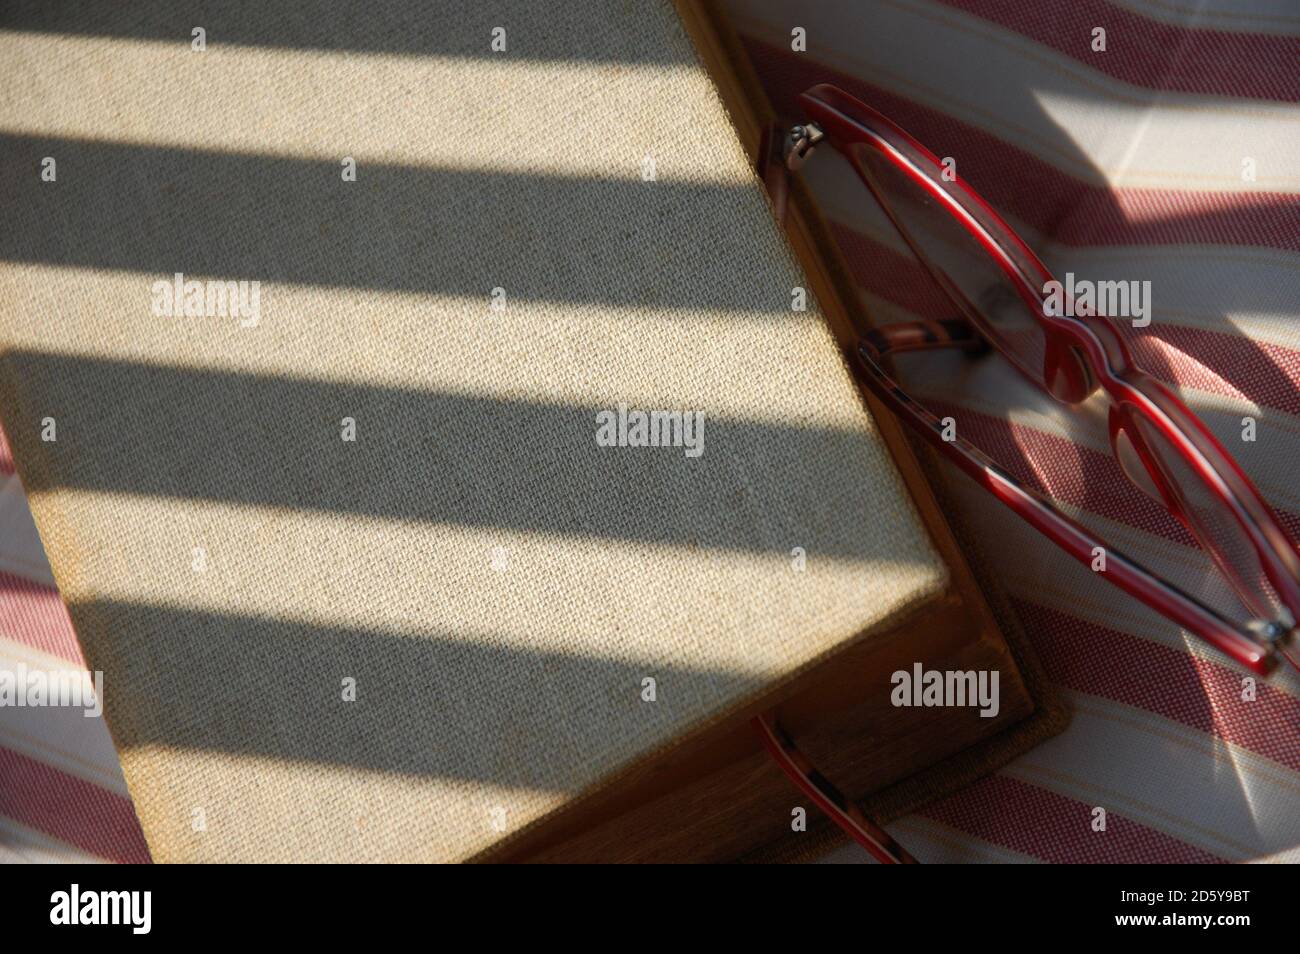 some light and shadow strips on a book cover on a chair strip cushion and red eyeglasses aside close up. summer readings. Stock Photo